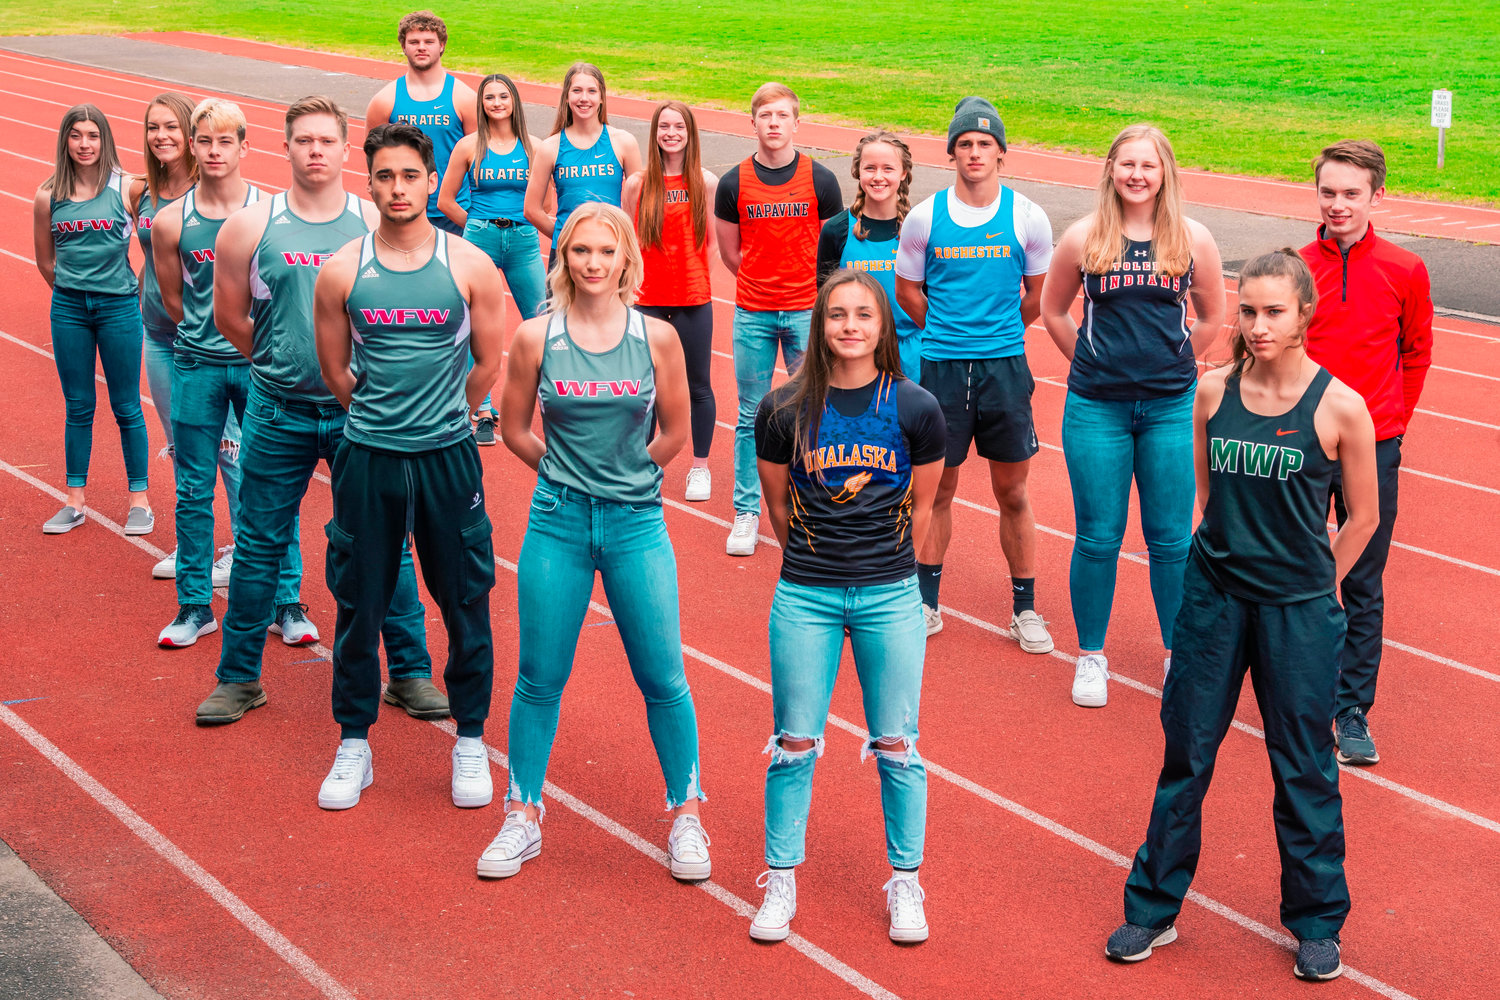 Members of the All-Area Track and Field team pose for a photo inside Bearcat Stadium last Sunday in Chehalis. In the back row, from left: Adna’s Lane Baker, Carli Latimer and Faith Wellander; Napavine’s Vannie Fagerness and Lucas Dahl; Rochester’s Lily Morgan and Talon Betts; and Toledo’s Stacie Spahr and Nicholas Marty. In the front row, from left: W.F. West’s Elaina Koenig, Kyla McCallum, Seth Hoff, Bryson Boyd, Connor Russell, and Gracie Ericson; Onalaska’s Brooklyn Sandridge; and MWP’s Jordan Koetje.